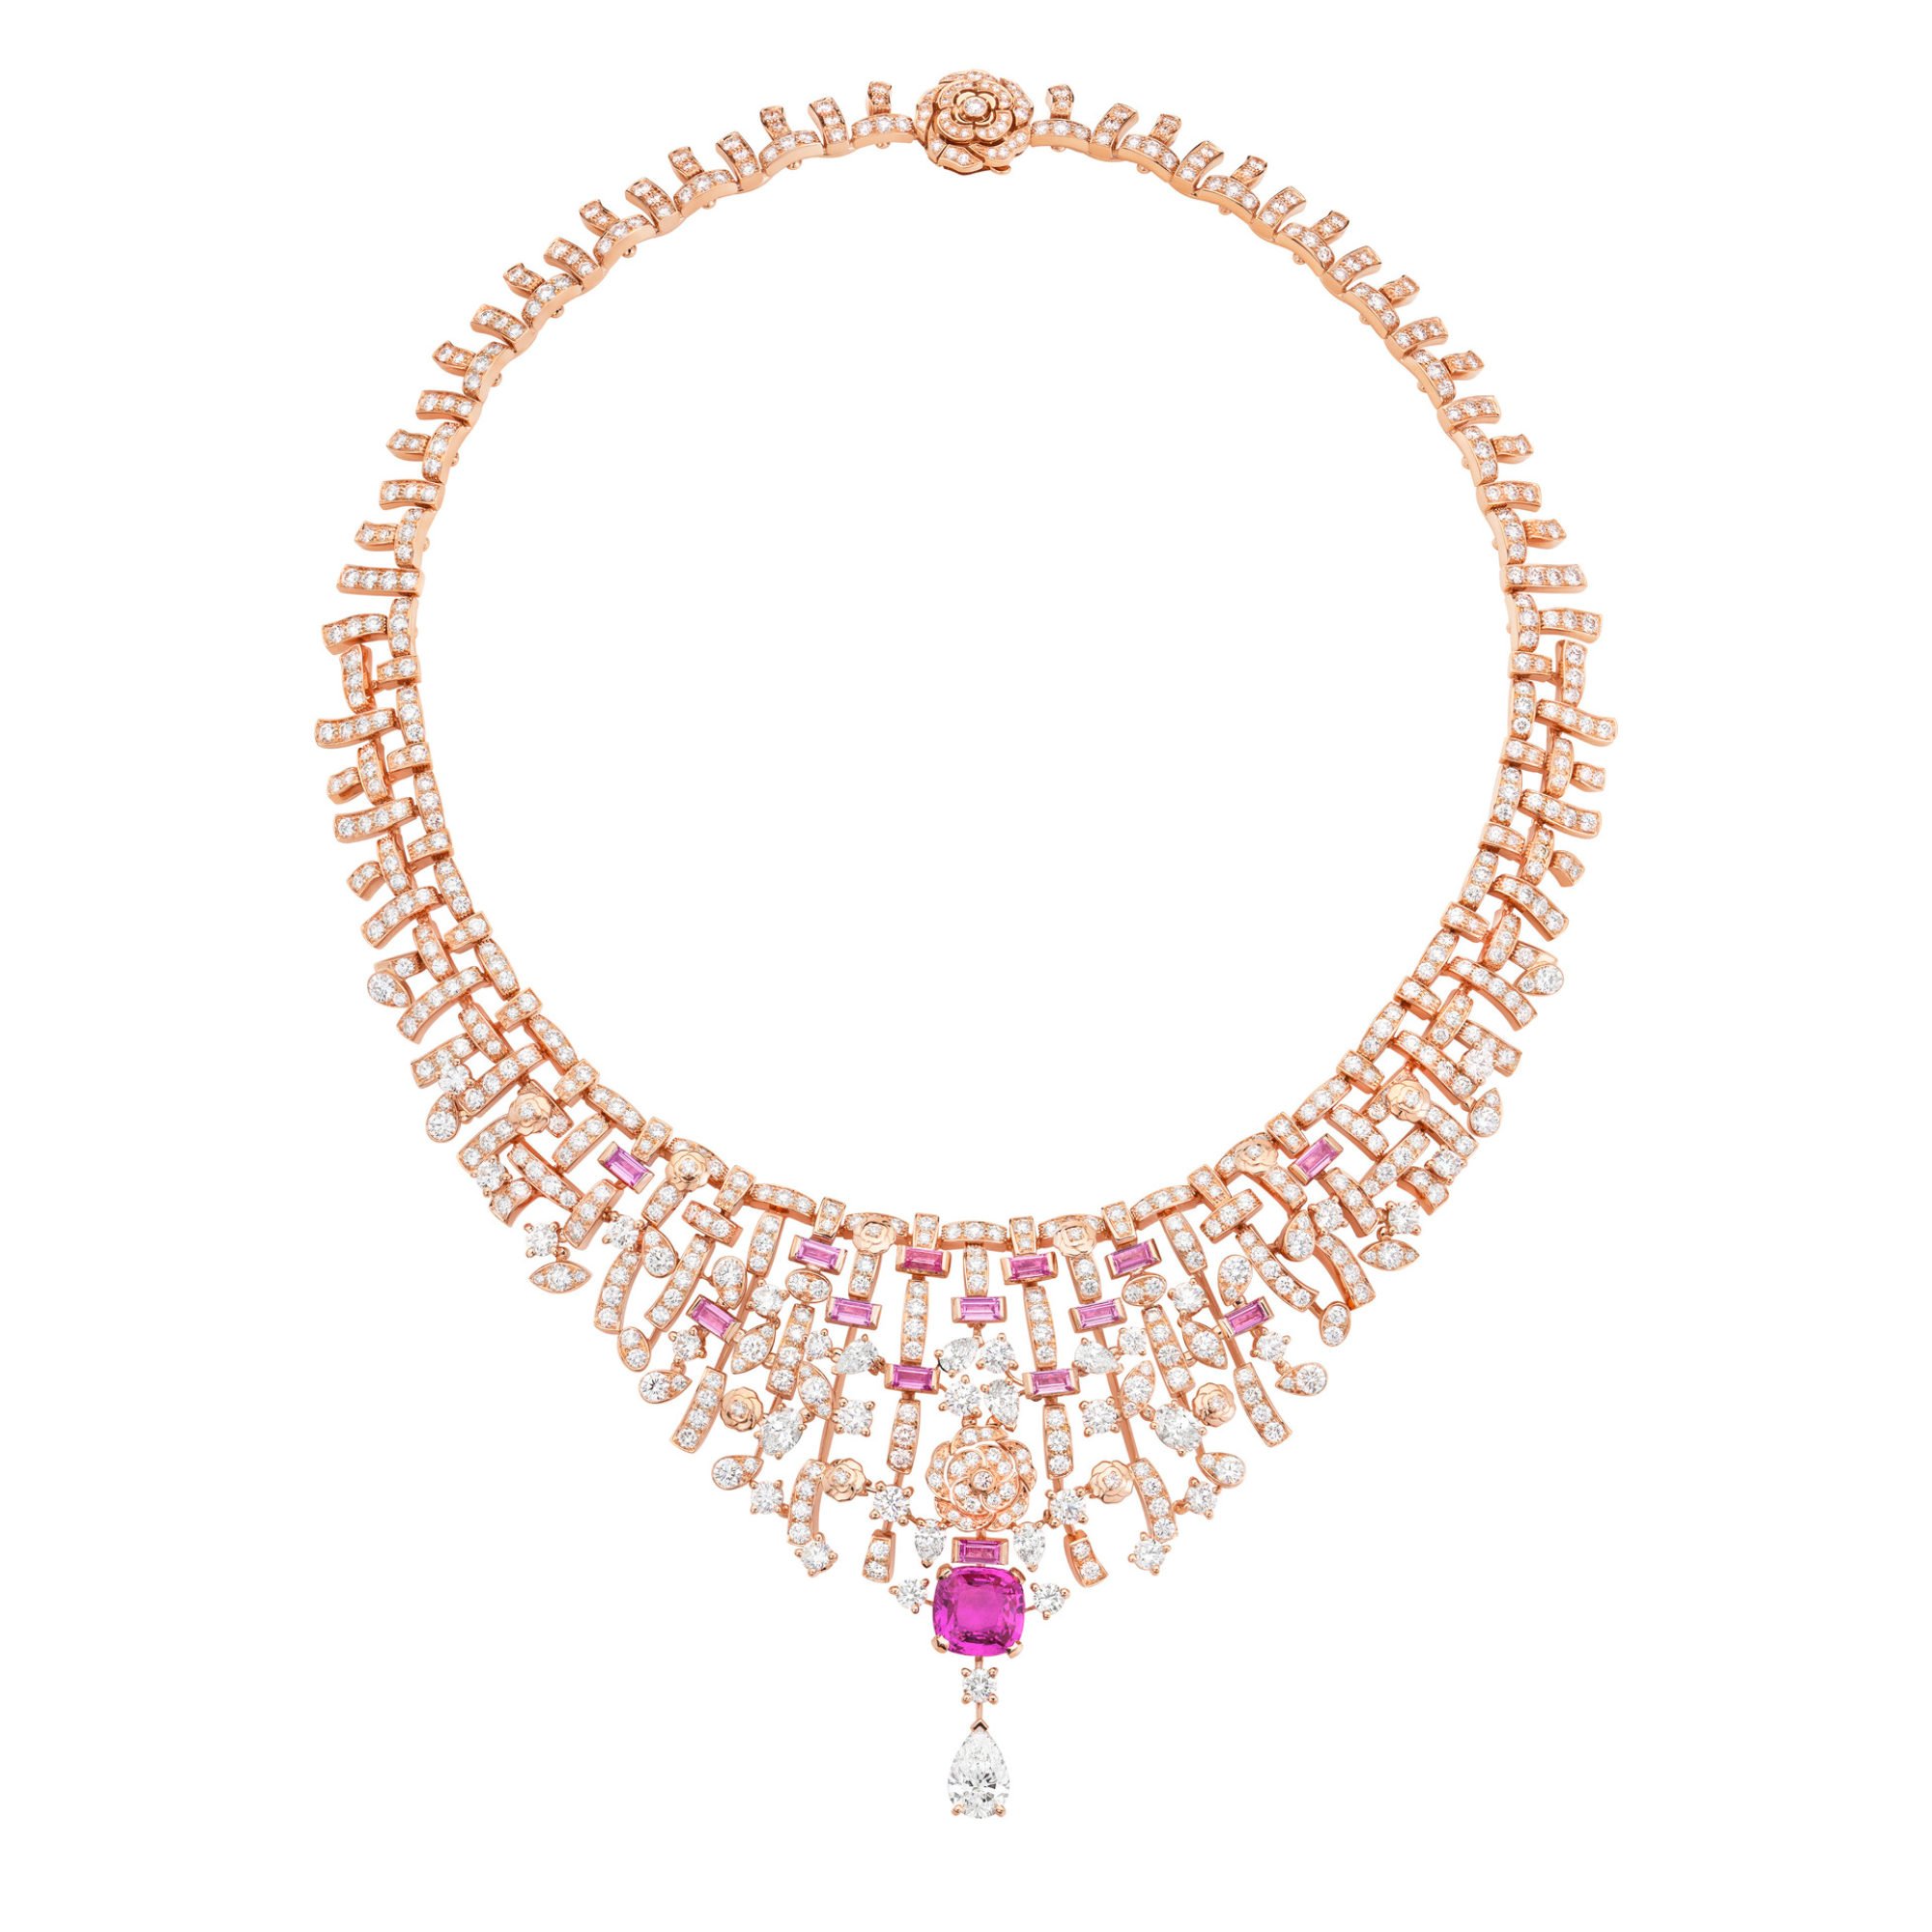 Louis Vuitton launches a high jewellery collection fit for a modern-day  Empress